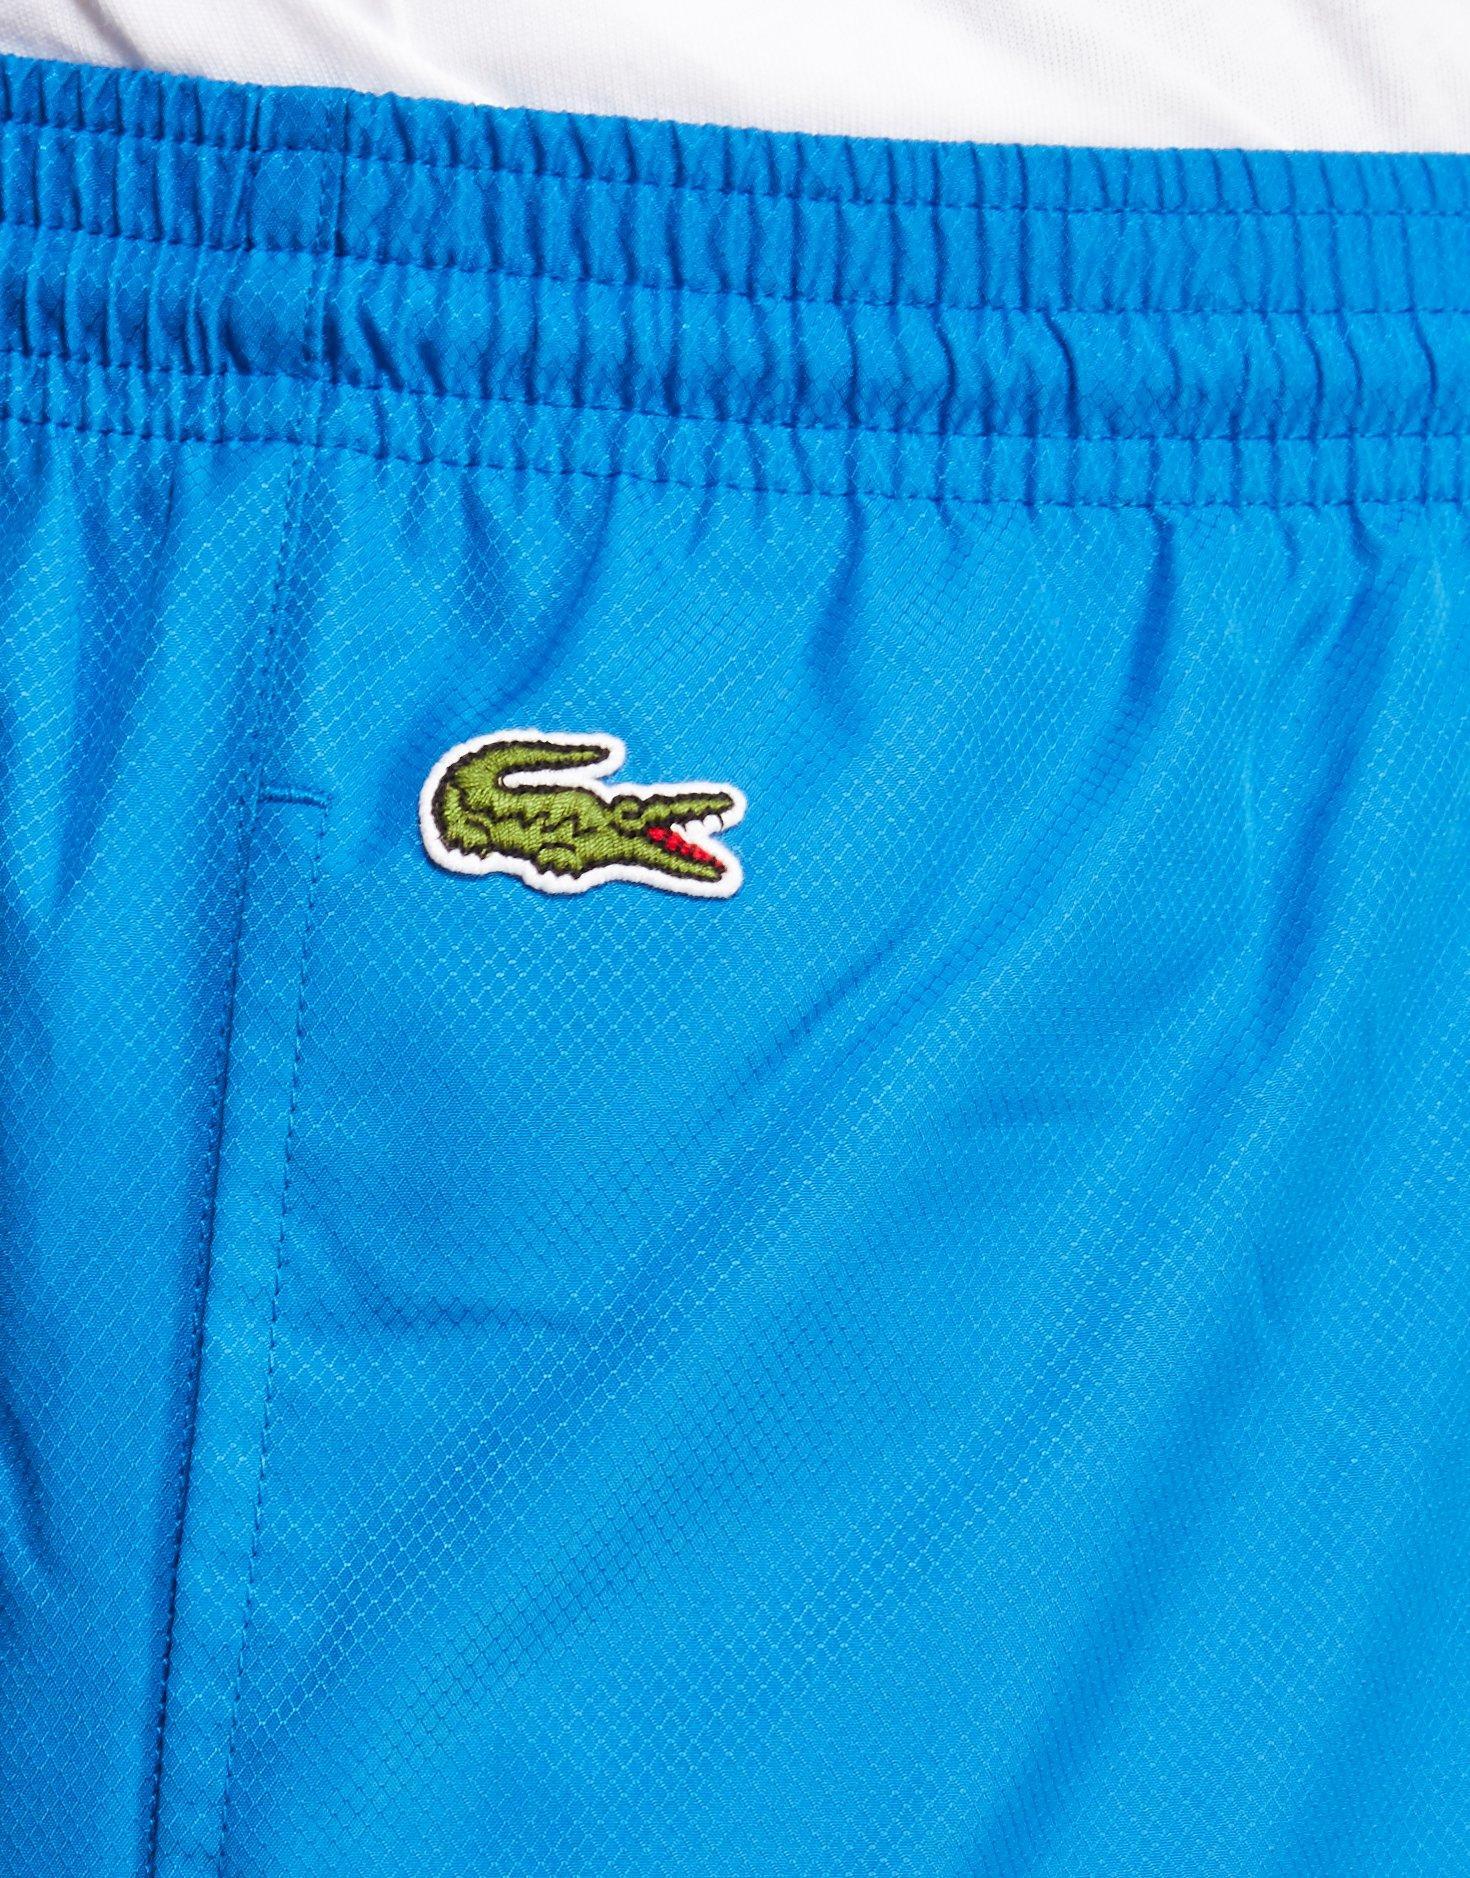 Lyst - Lacoste Guppy Track Pants in Blue for Men